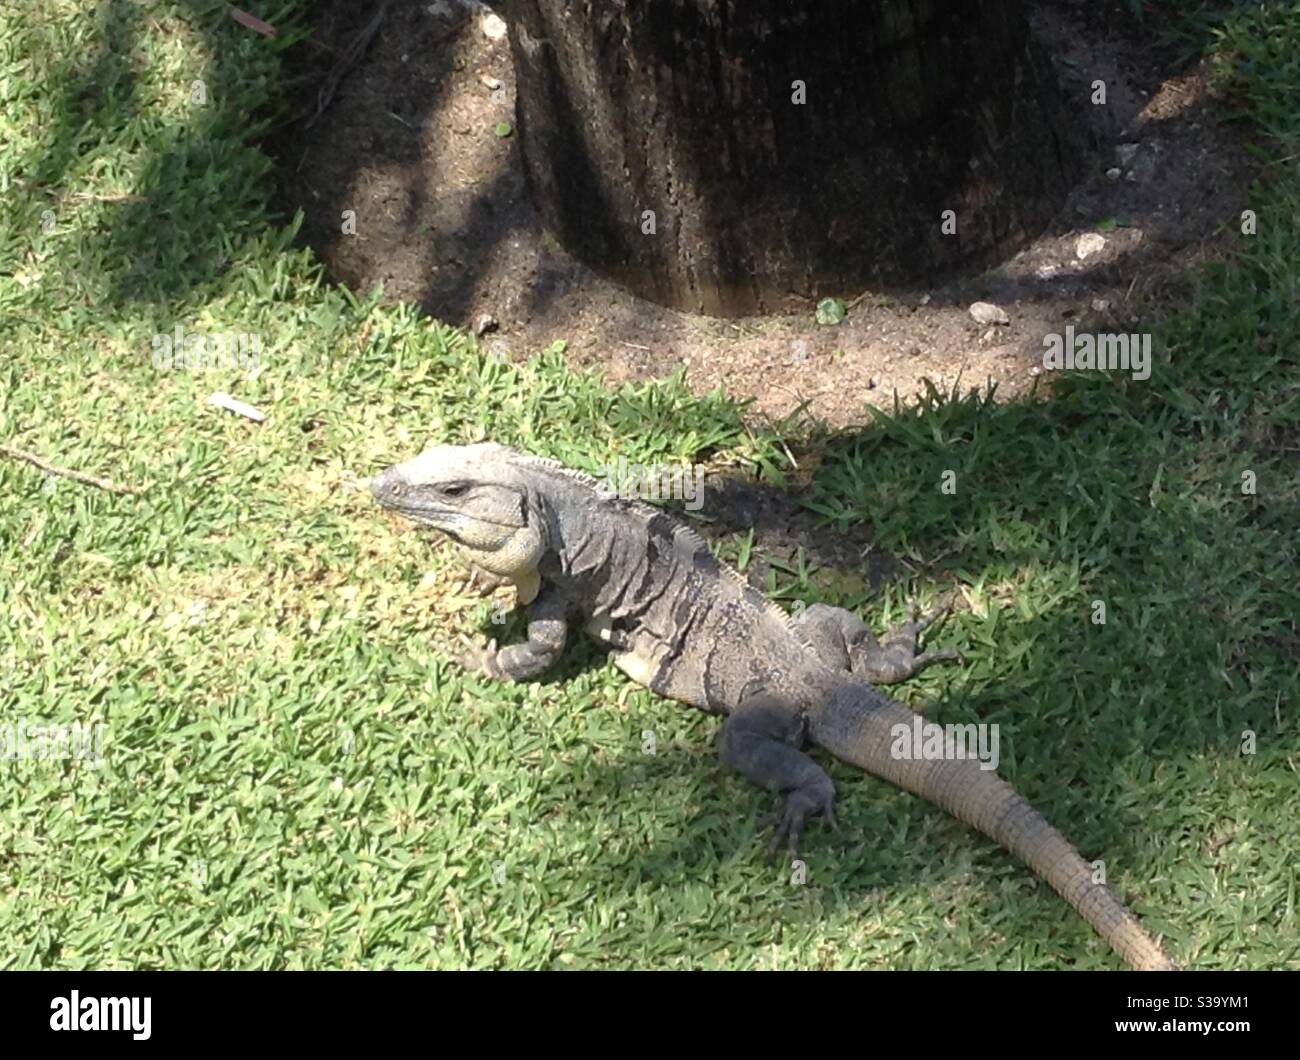 Lizard cooling off in the shade on the grass under a tree Stock Photo